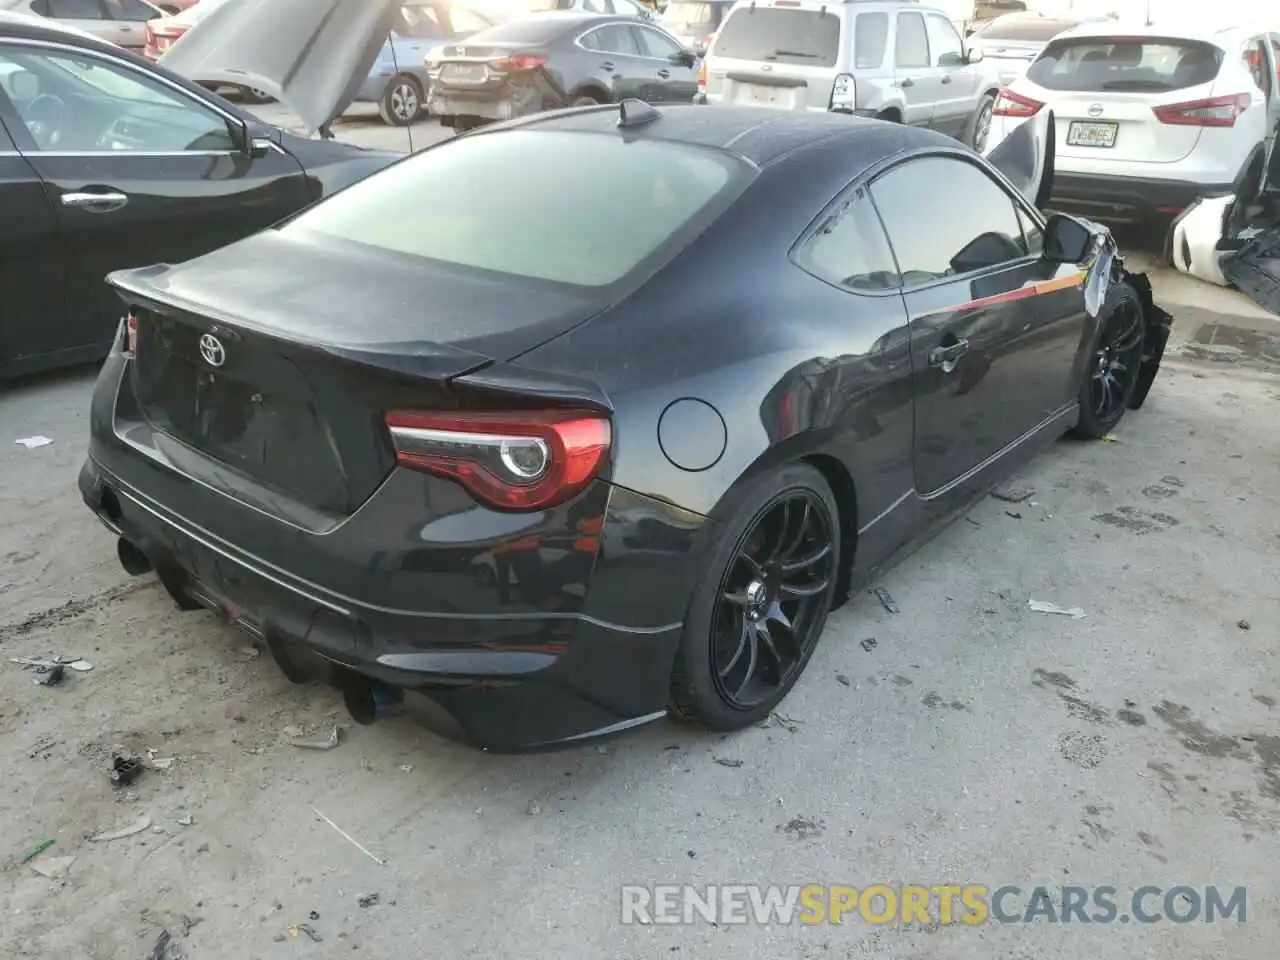 4 Photograph of a damaged car JF1ZNAE1XK9702945 TOYOTA 86 GT 2019